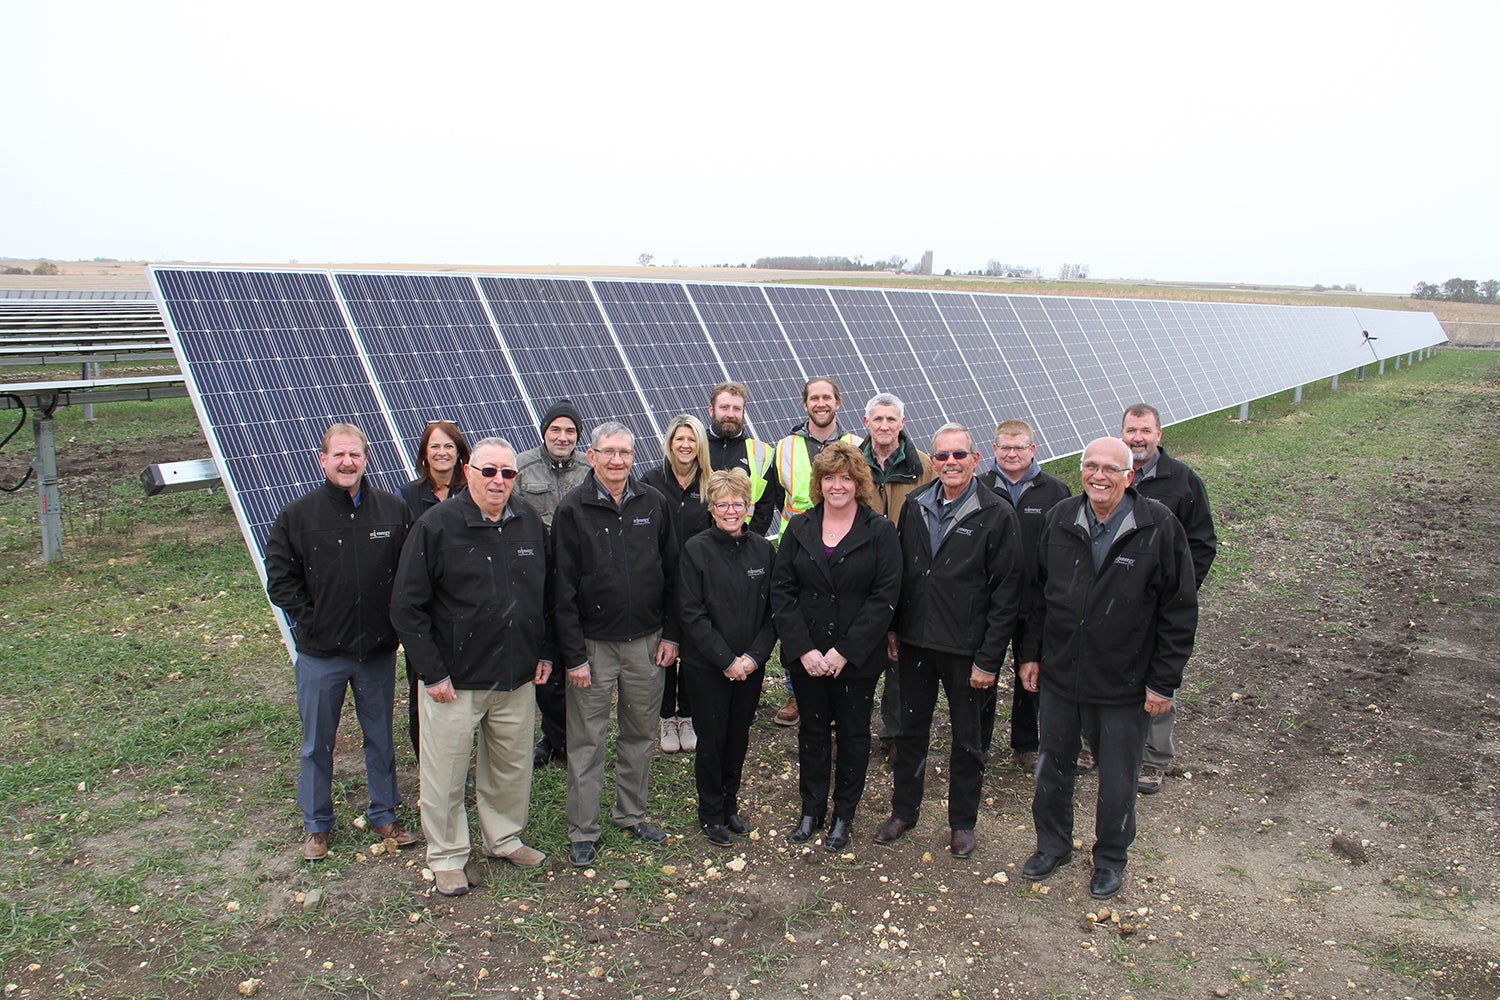 MiEnergy staff and board standing in front of solar panel